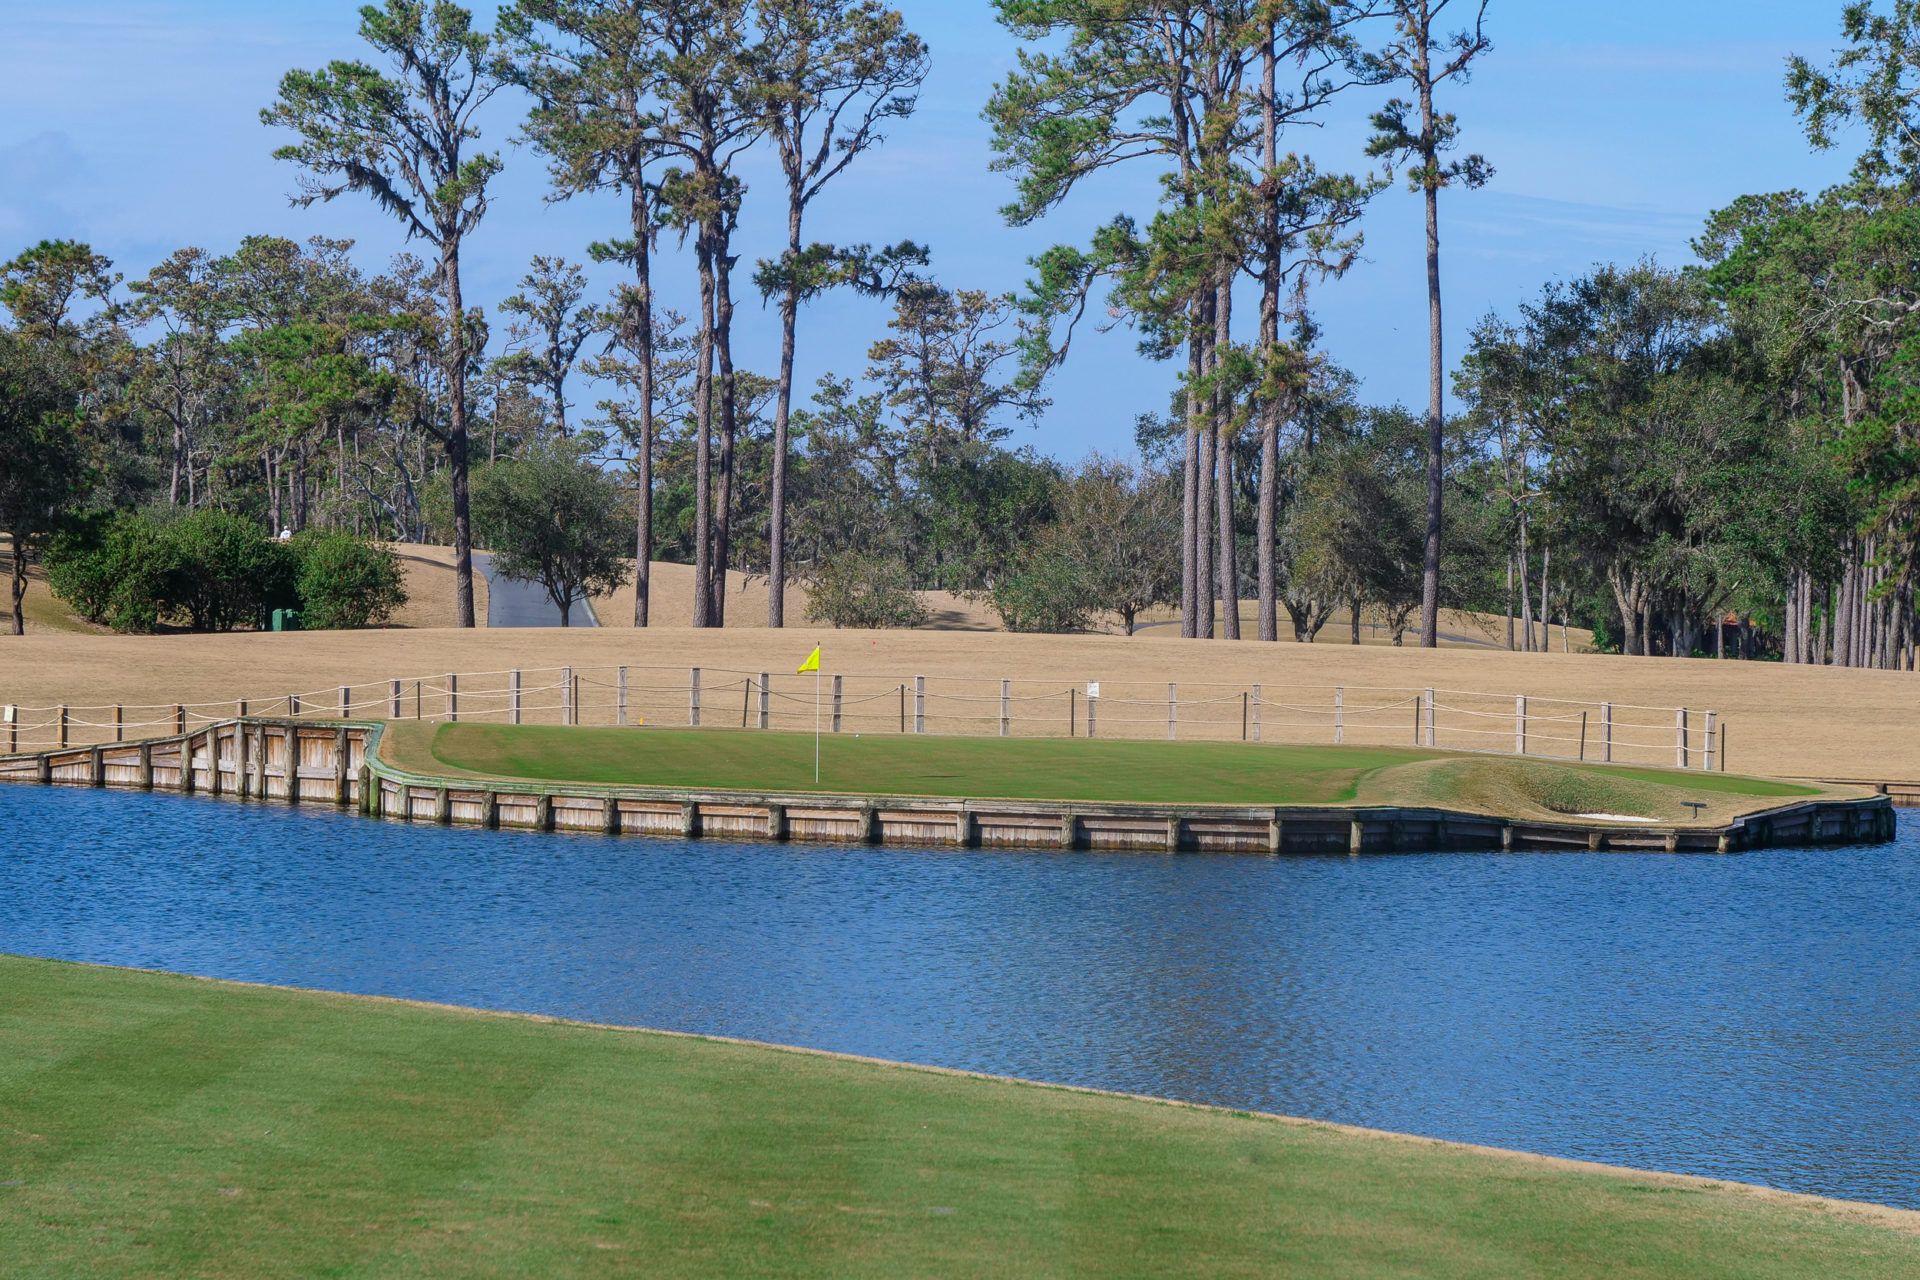 The 17th hole at TPC Sawgrass in Ponte Vedra Beach, Florida